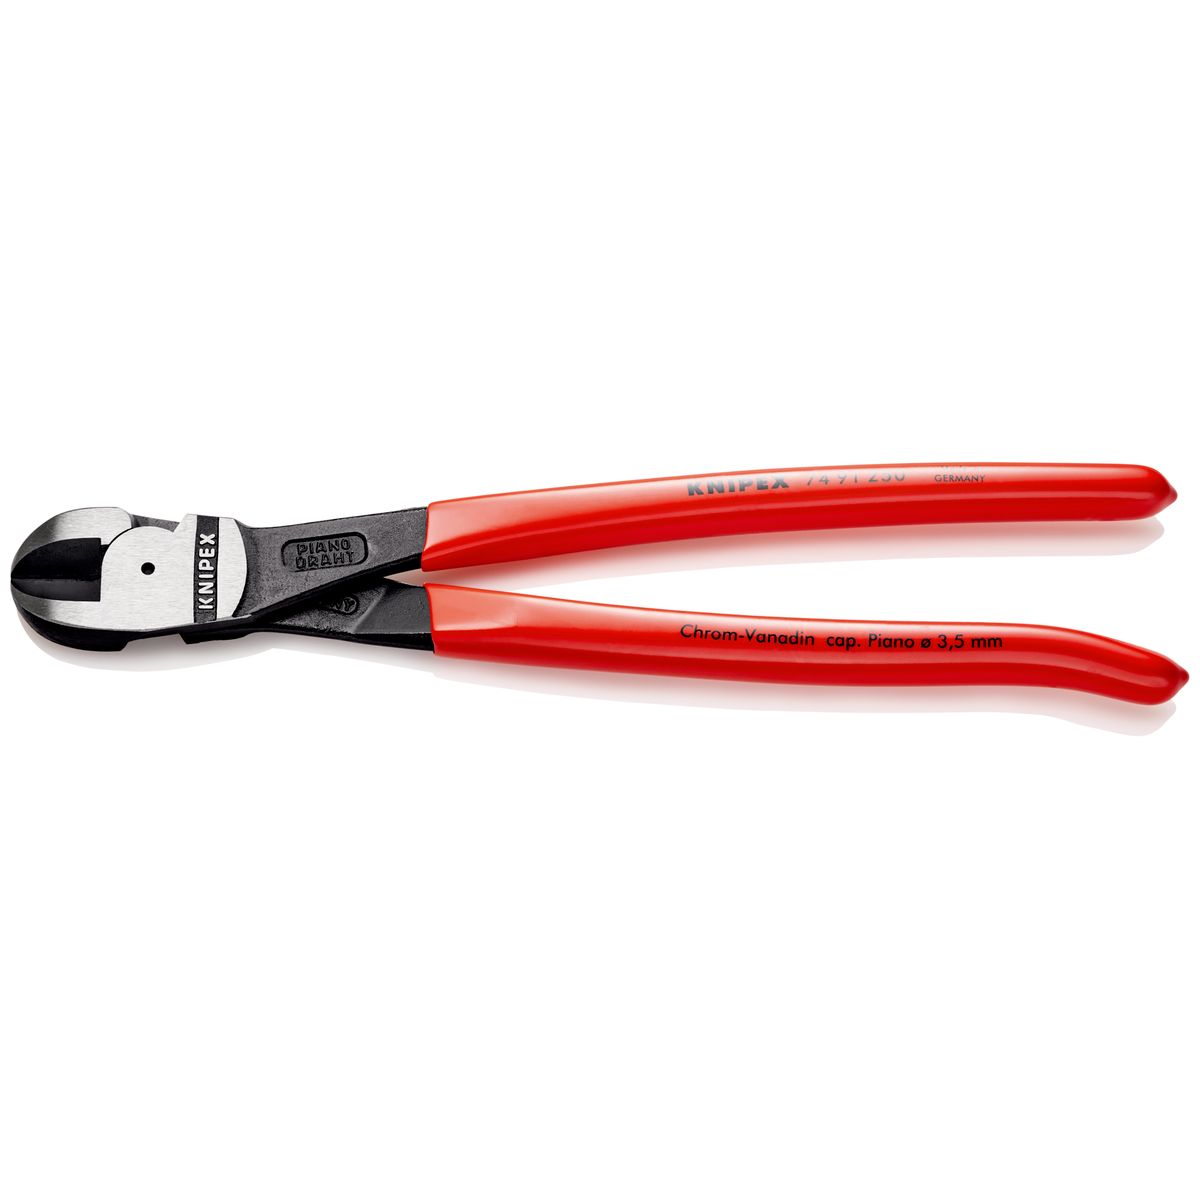 CENTER CUTTERS 7491250 Knipex